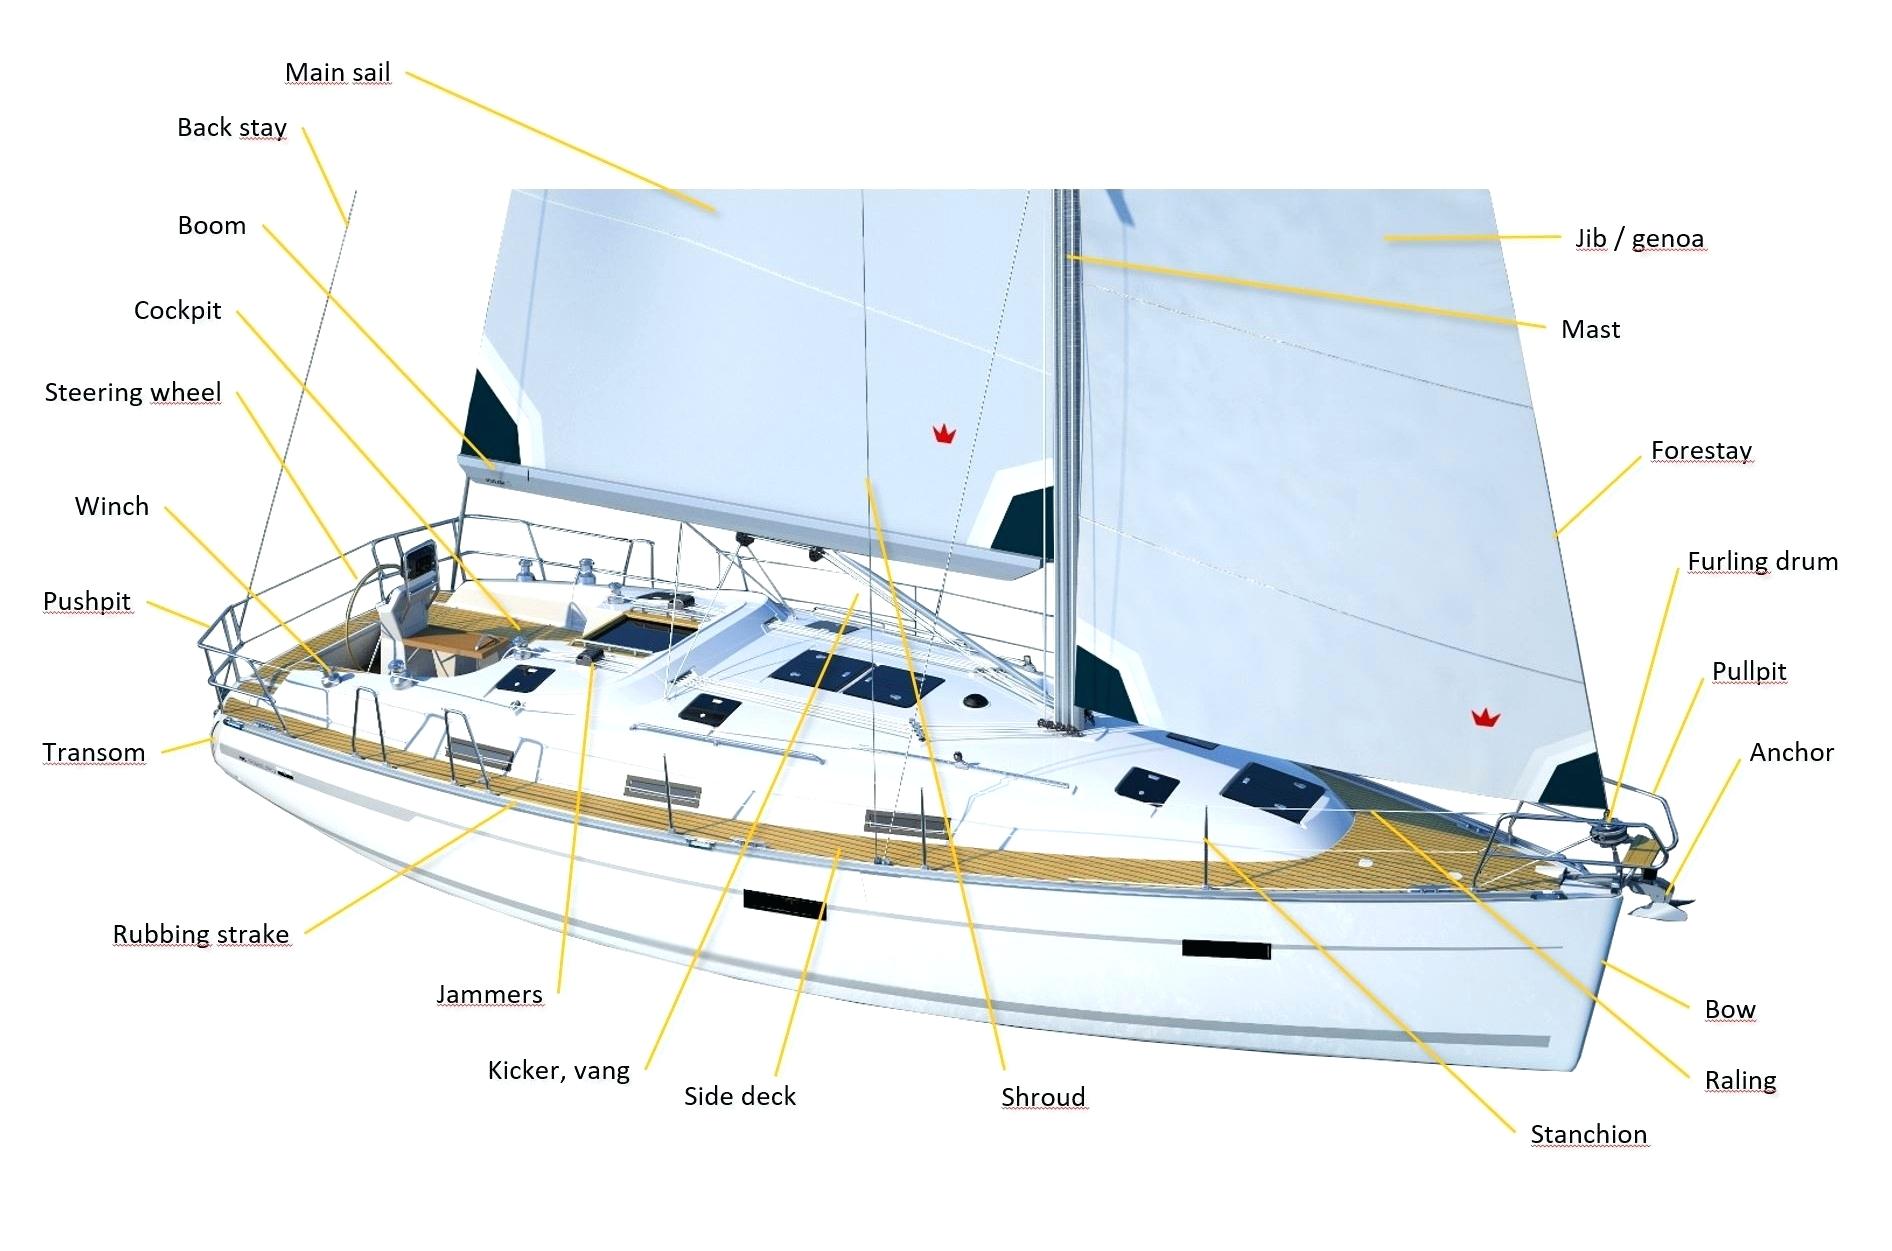 yacht rigging parts